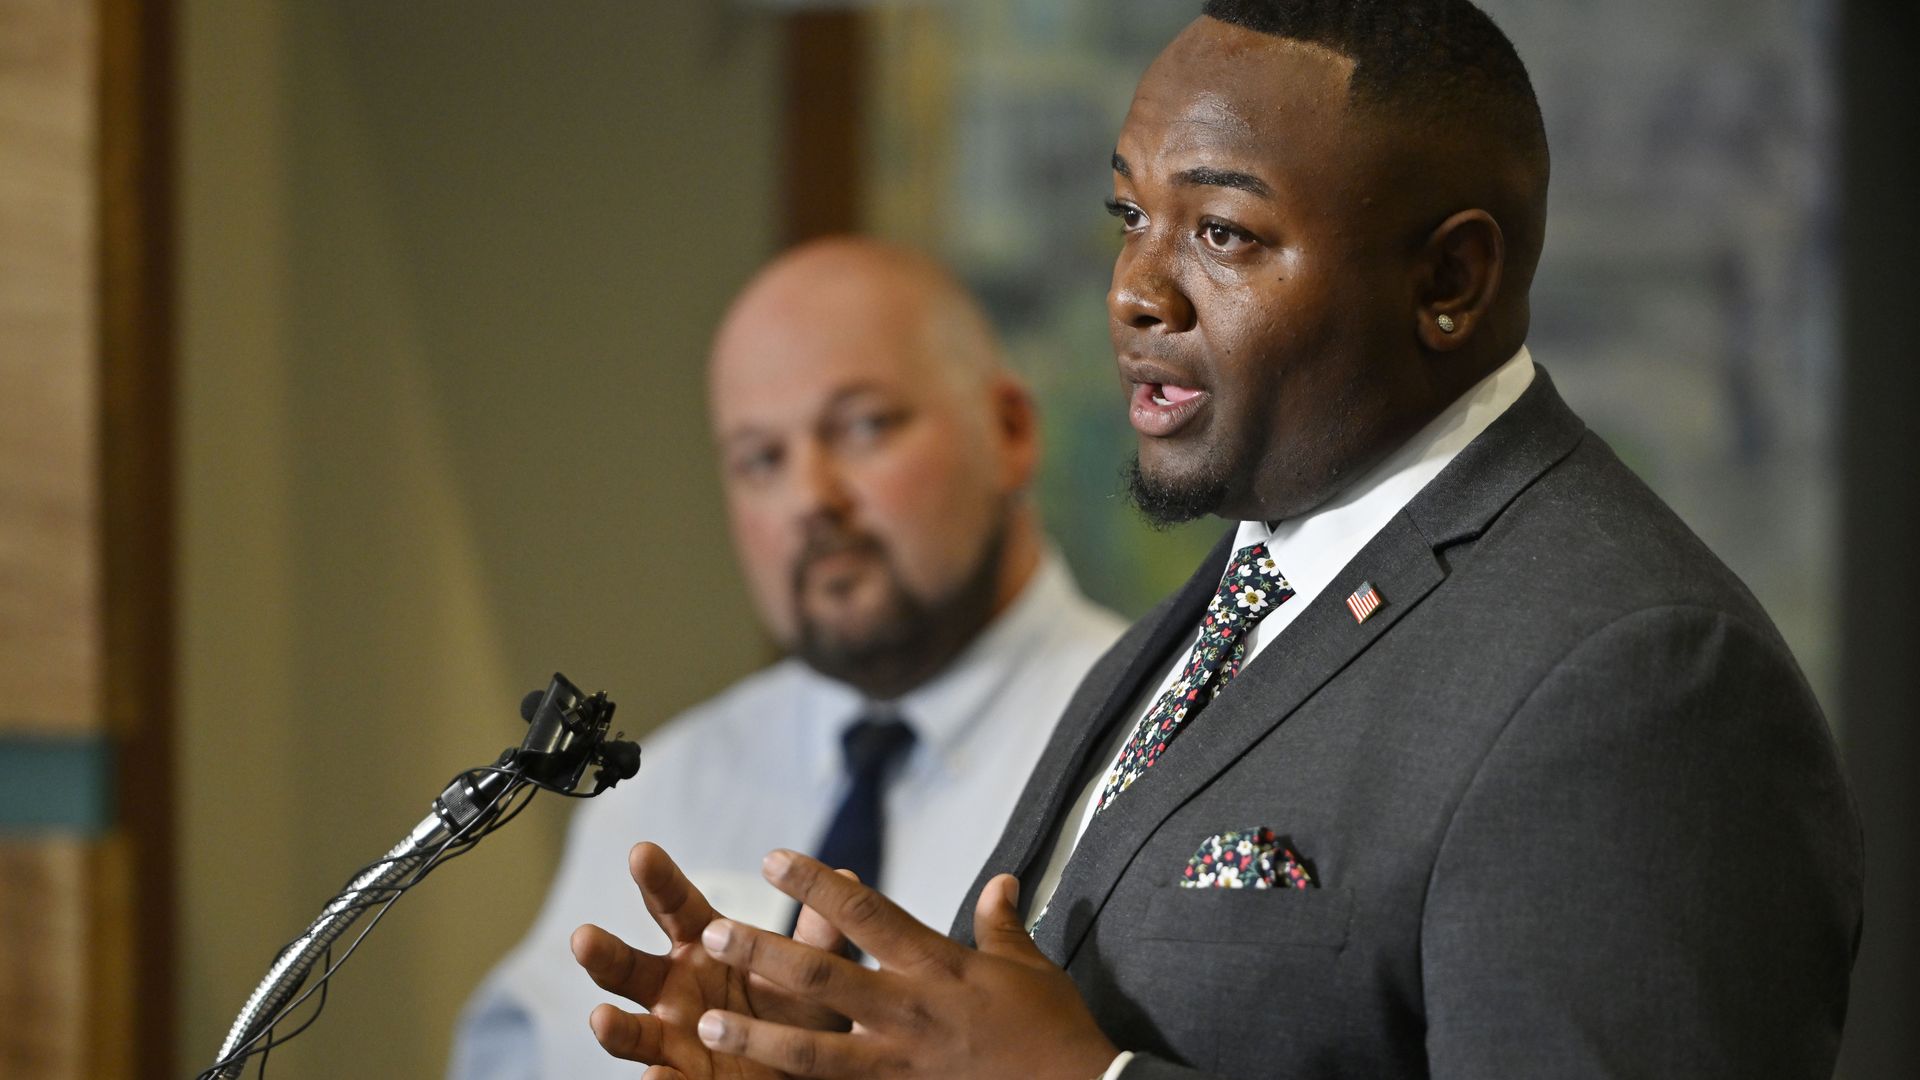 Denver School Board vice president Auon'tai Anderson answers questions during a press conference announcing a plan to return resource officers May 31. Photo: Eric Lutzens/Denver Post via Getty Images